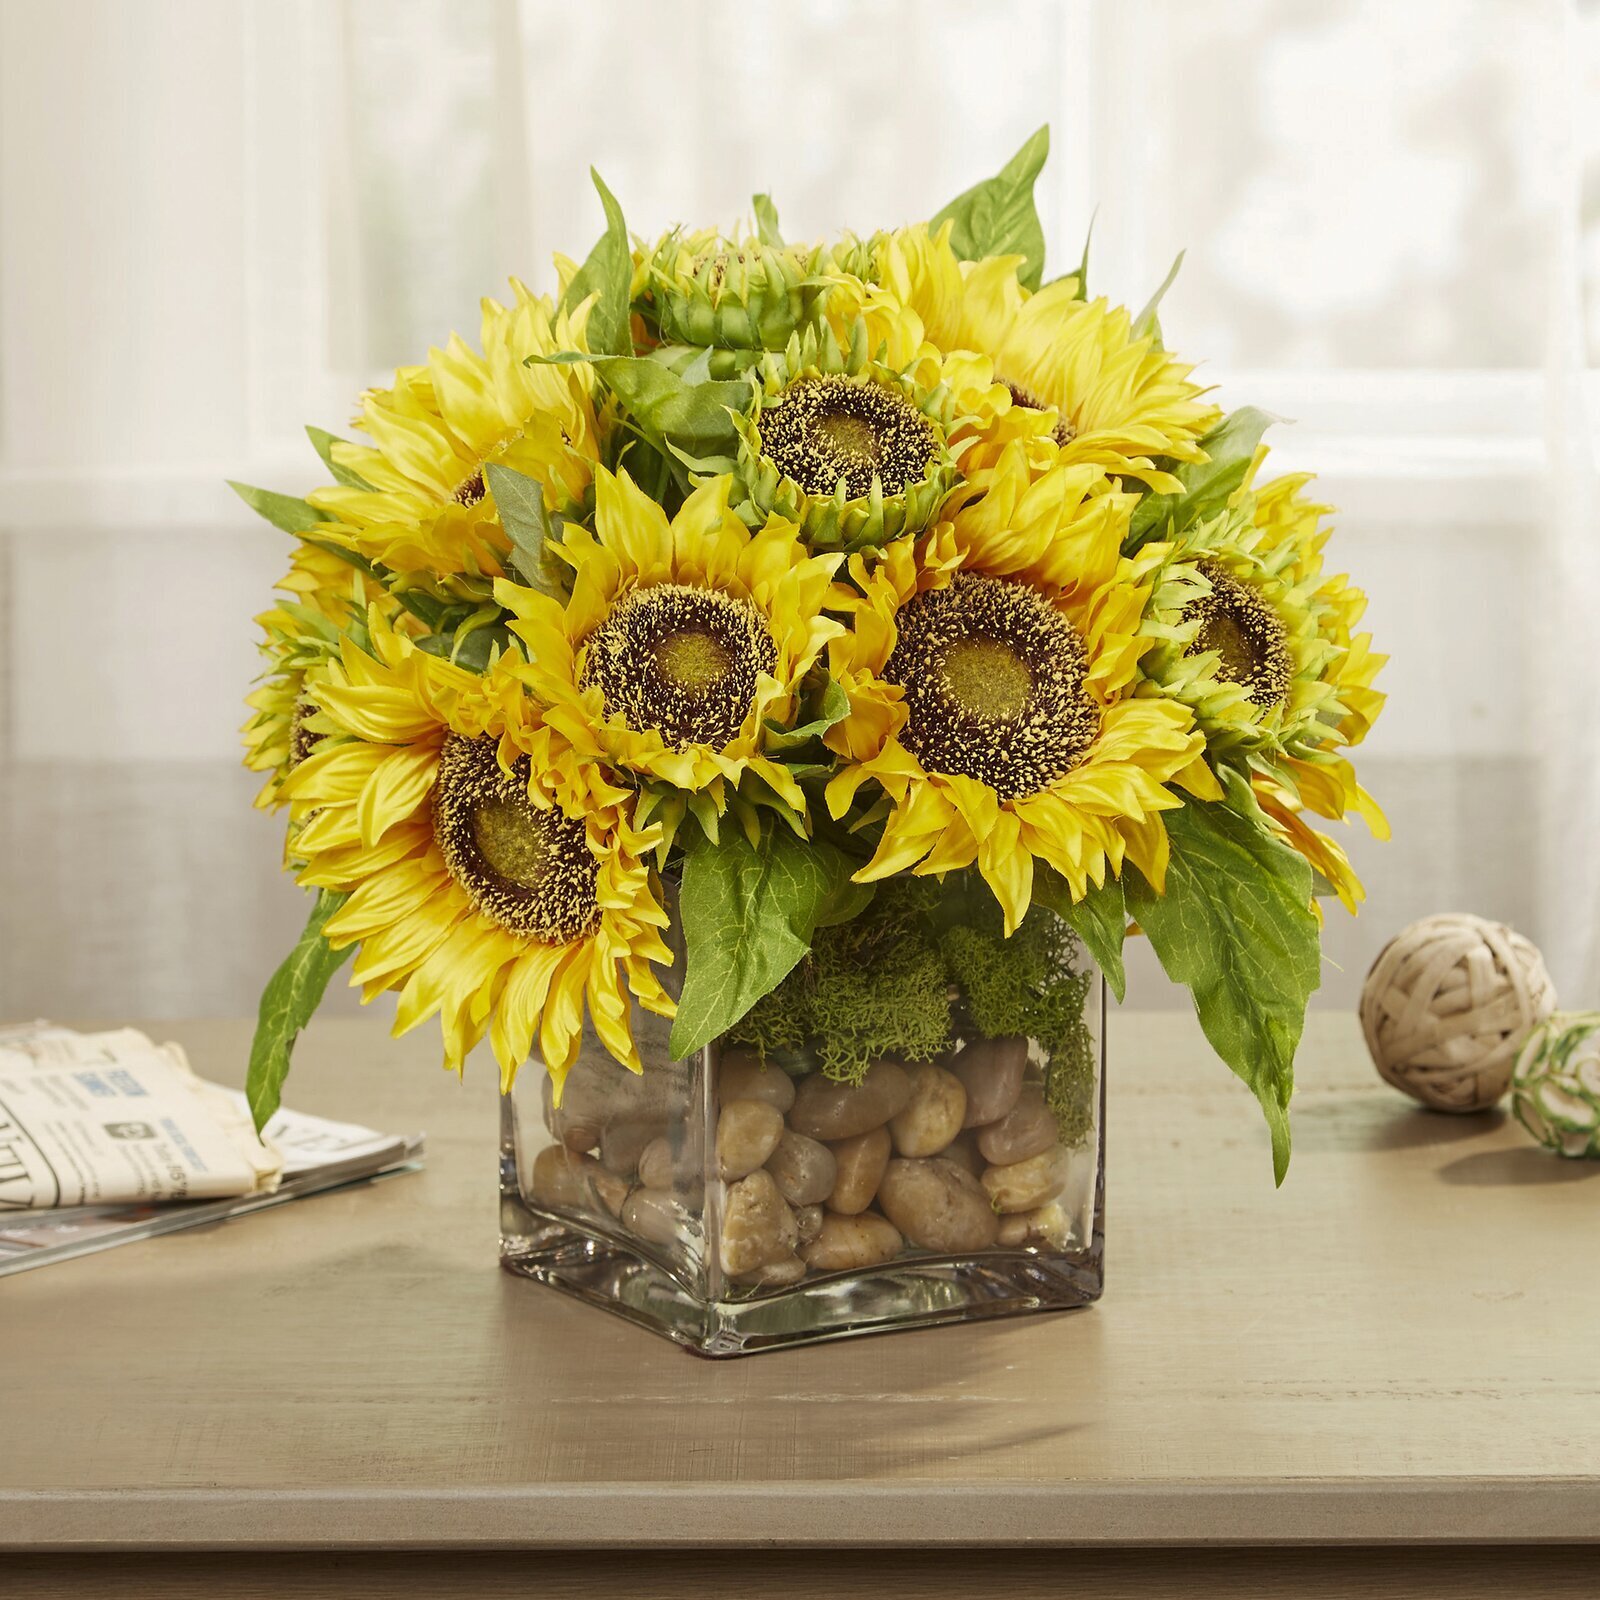 Sunflower centerpieces for dining table